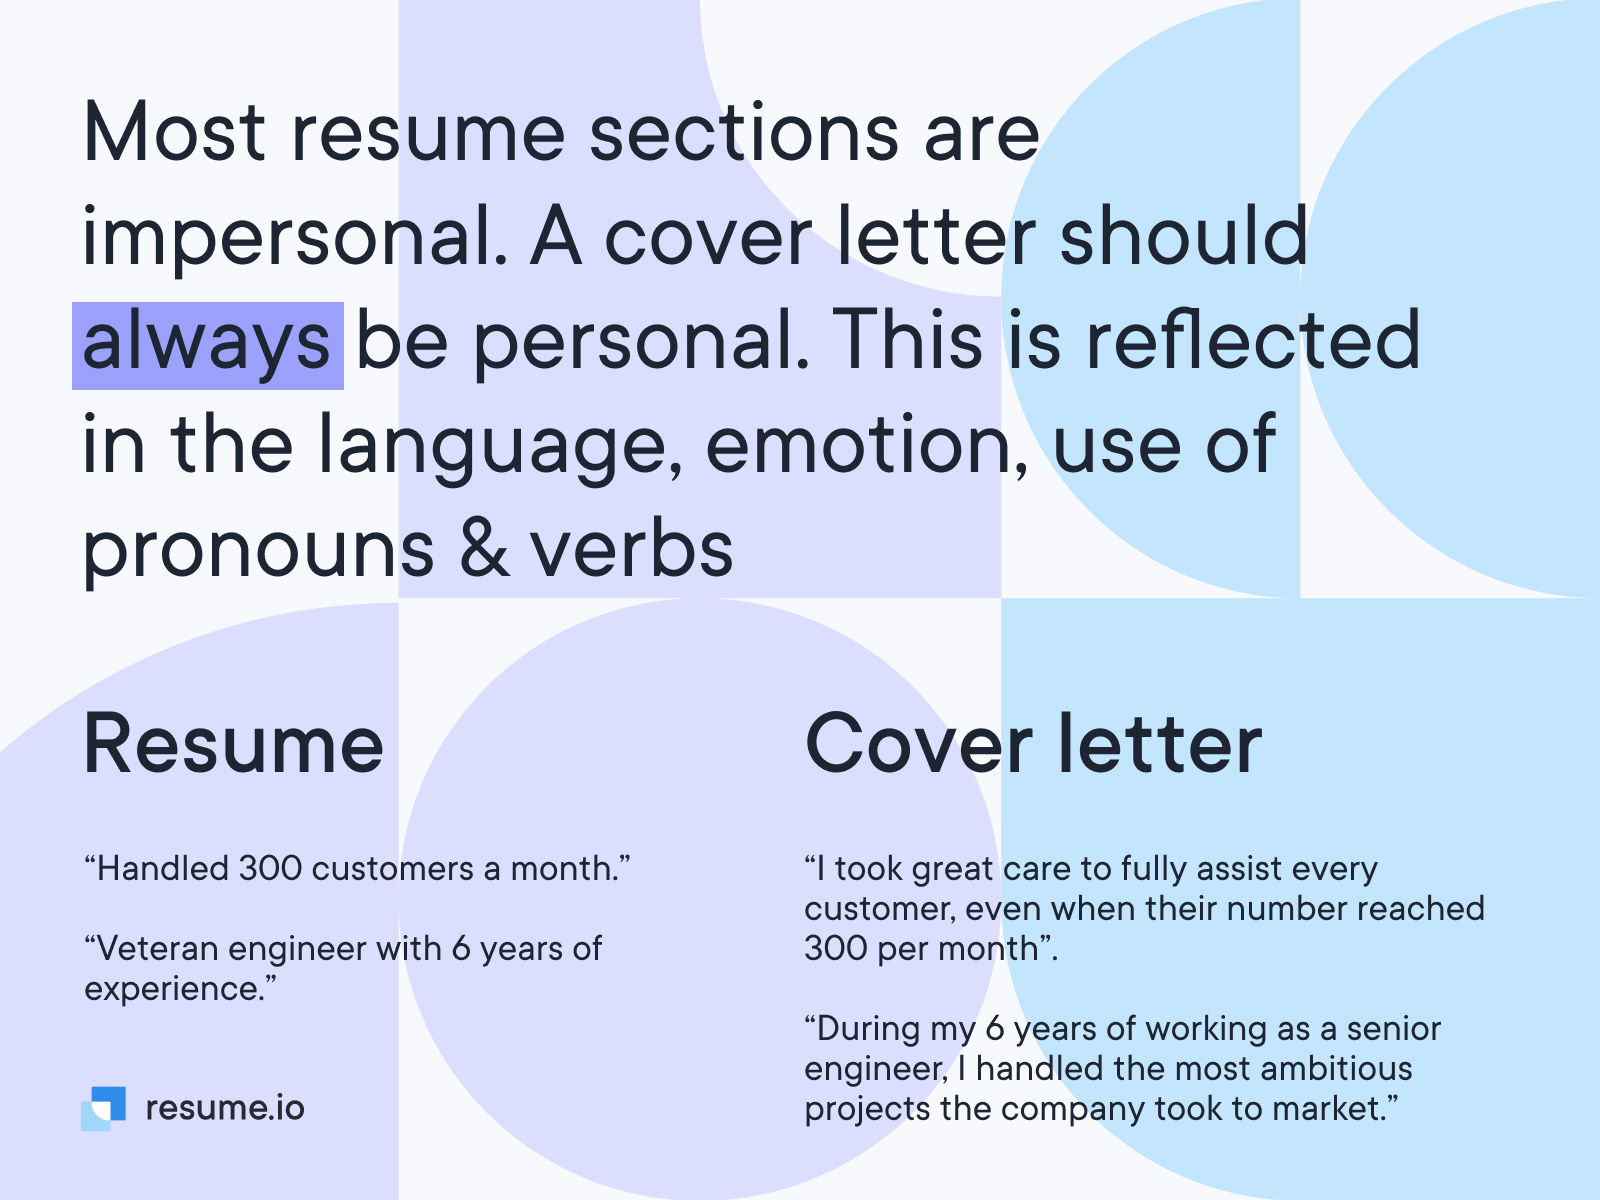 A cover letter should always be personal.